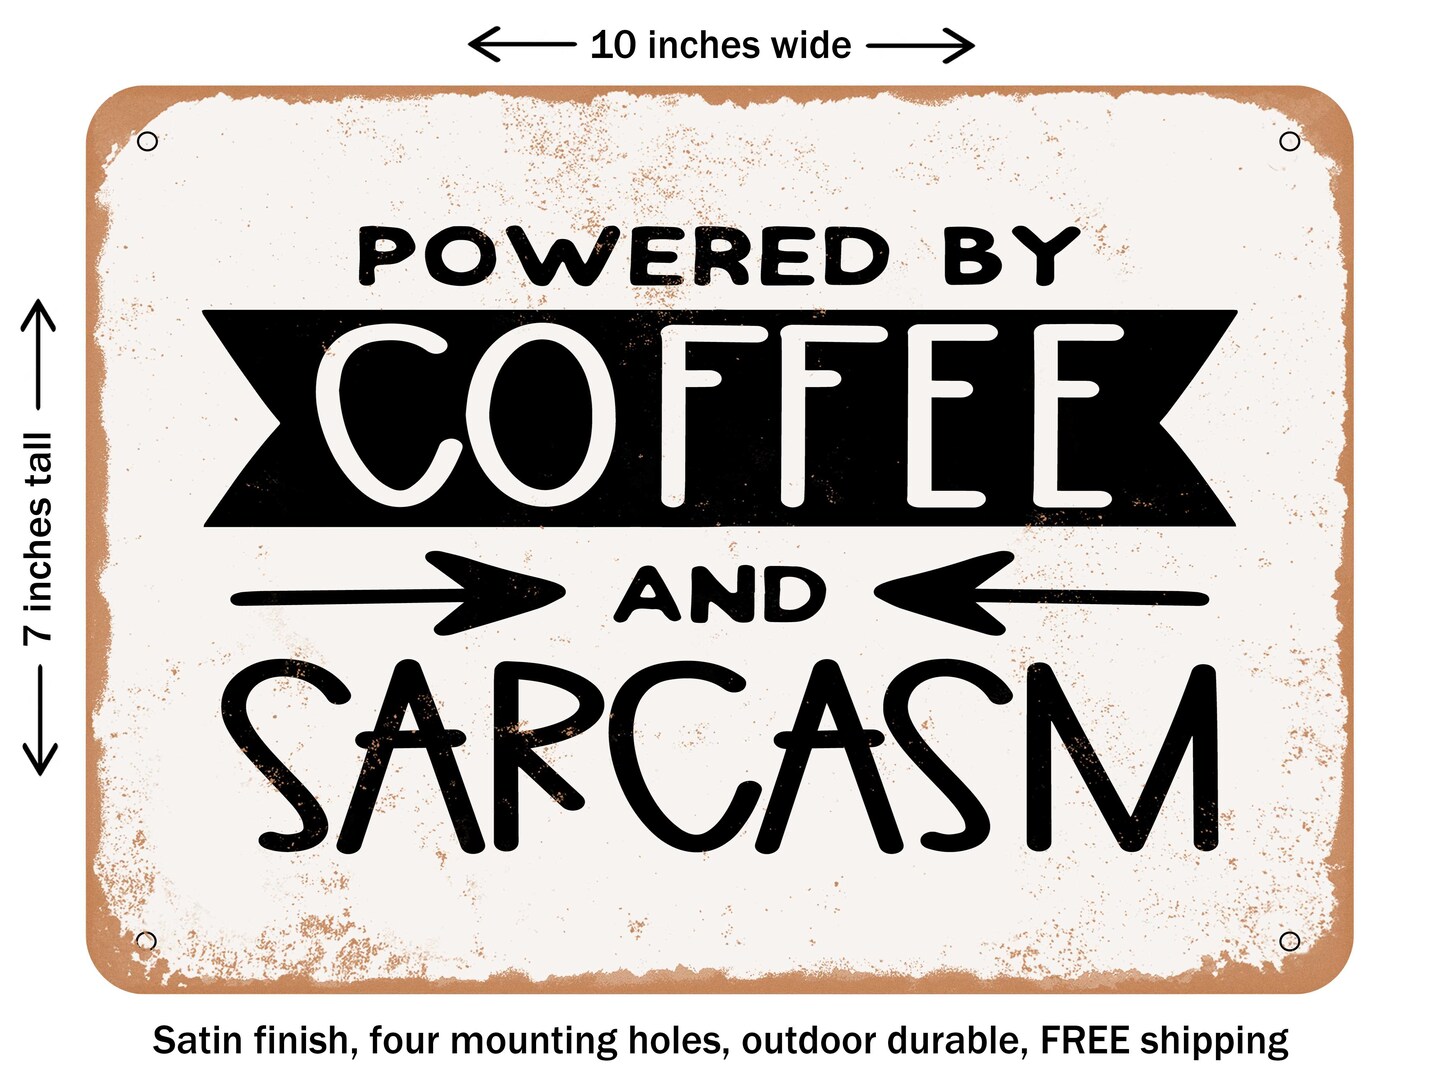 DECORATIVE METAL SIGN - Powered by Coffee and Sarcasm - 2 - Vintage Rusty Look